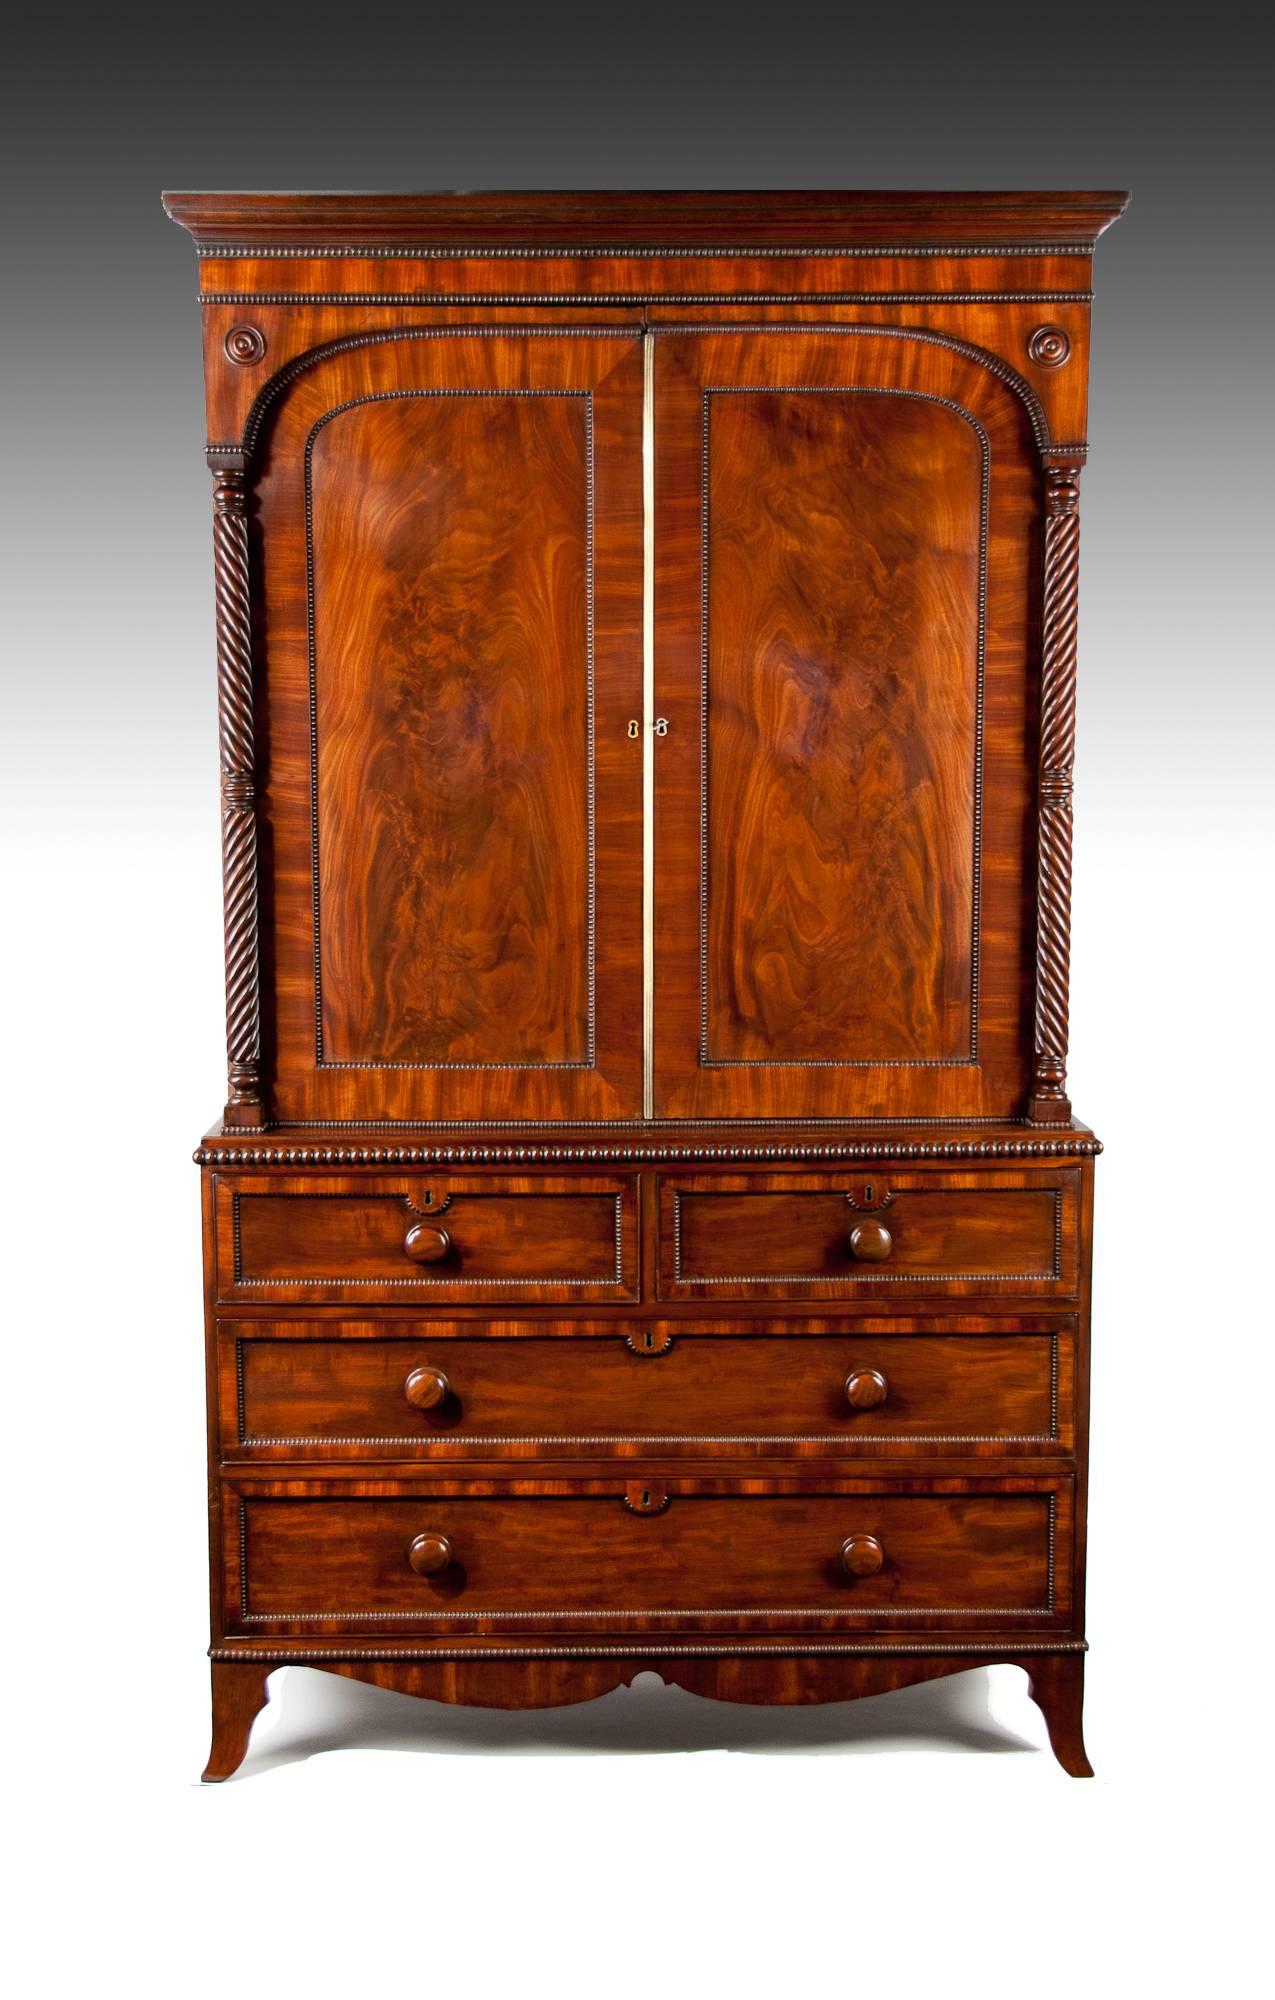 A superb William IV mahogany Linen Press with a wonderful colour and patina, circa 1830.
This antique linen press has been constructed with choice veneers of mahogany which have mellowed over the years to a stunning colour and patina. 
The moulded